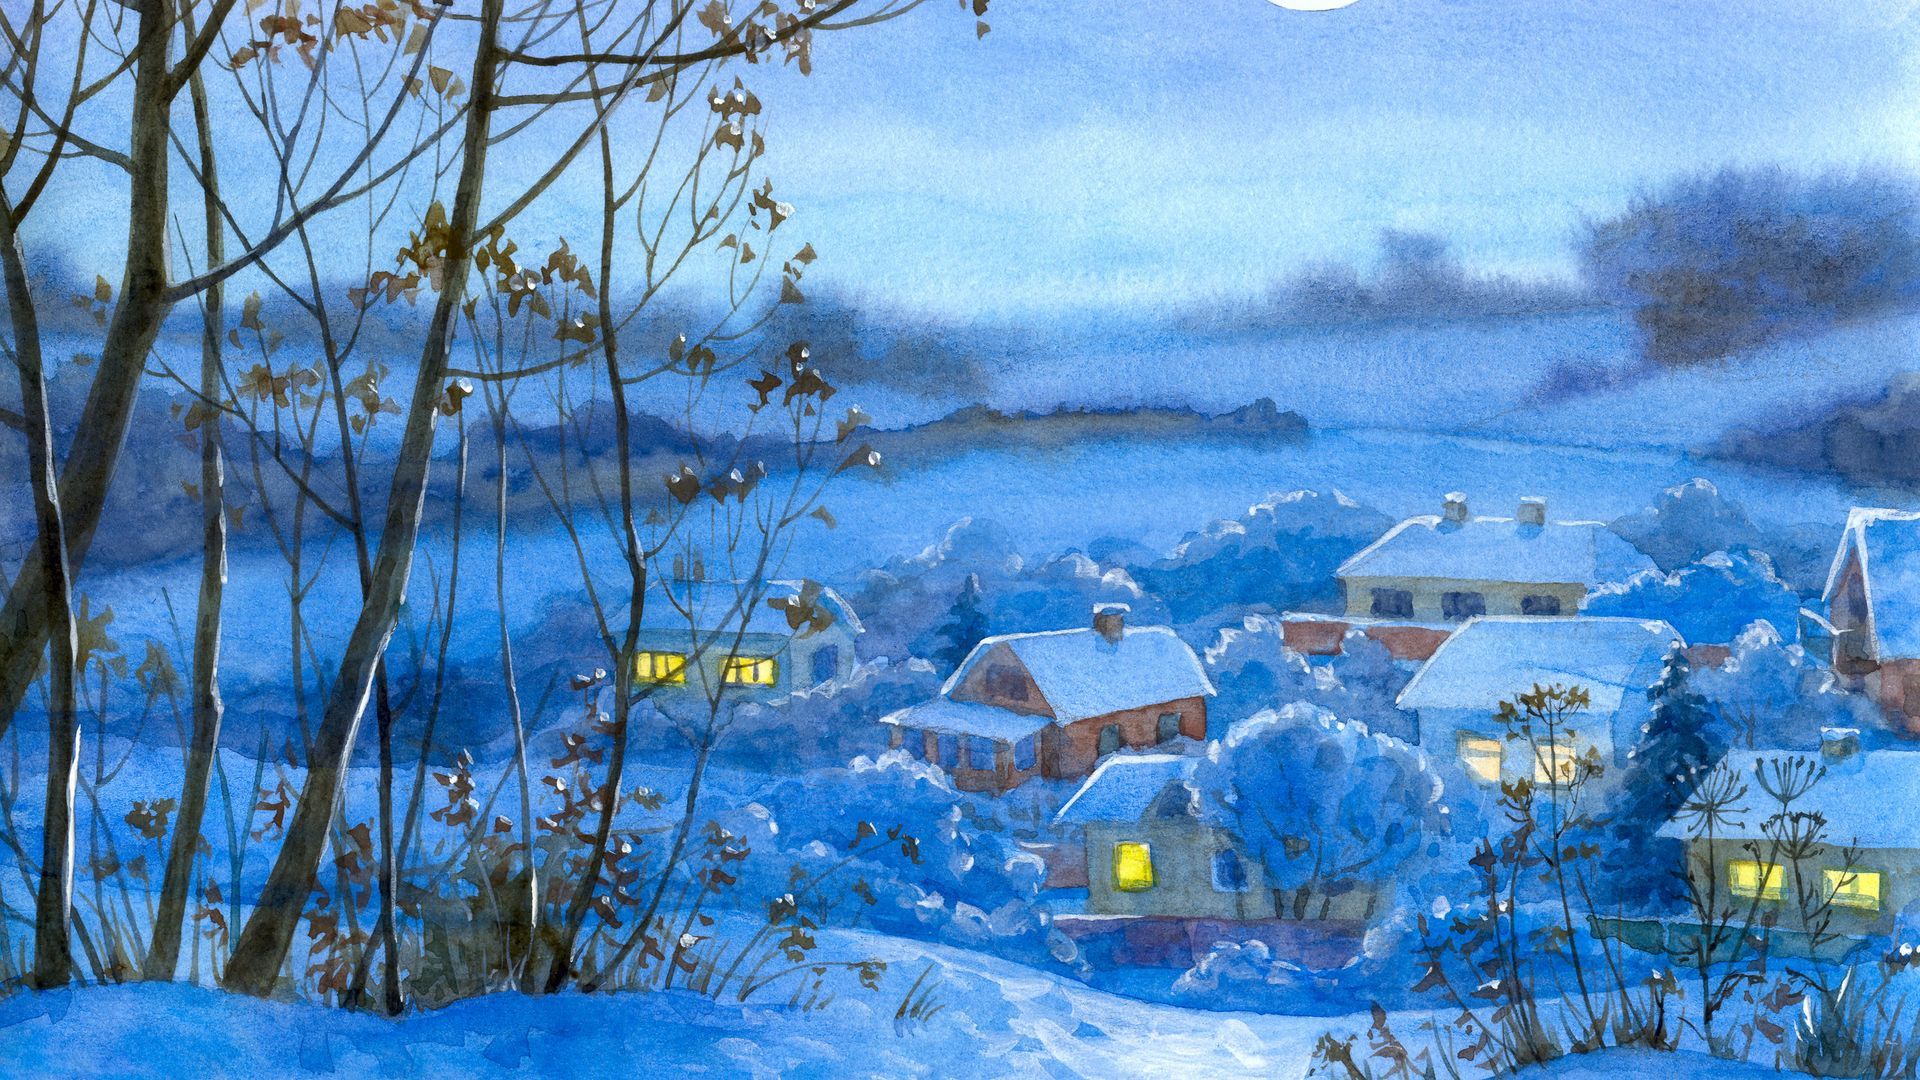 Download wallpaper 1920x1080 painting, winter, village, home, night, month, snow full hd, hdtv, fhd, 1080p HD background